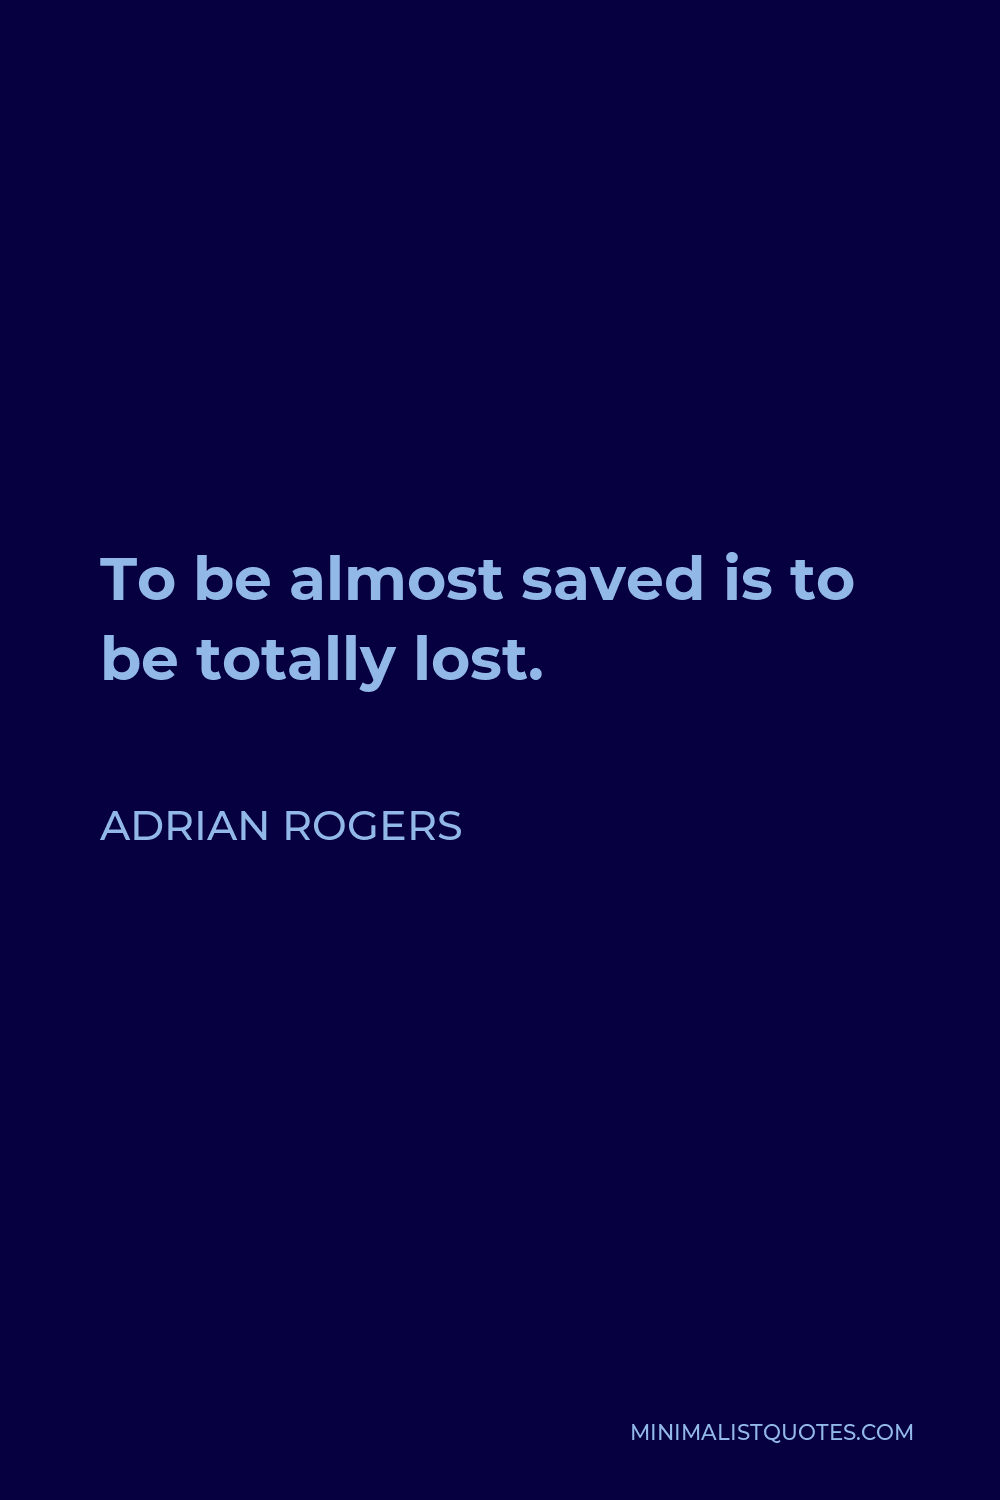 Adrian Rogers Quote - To be almost saved is to be totally lost.